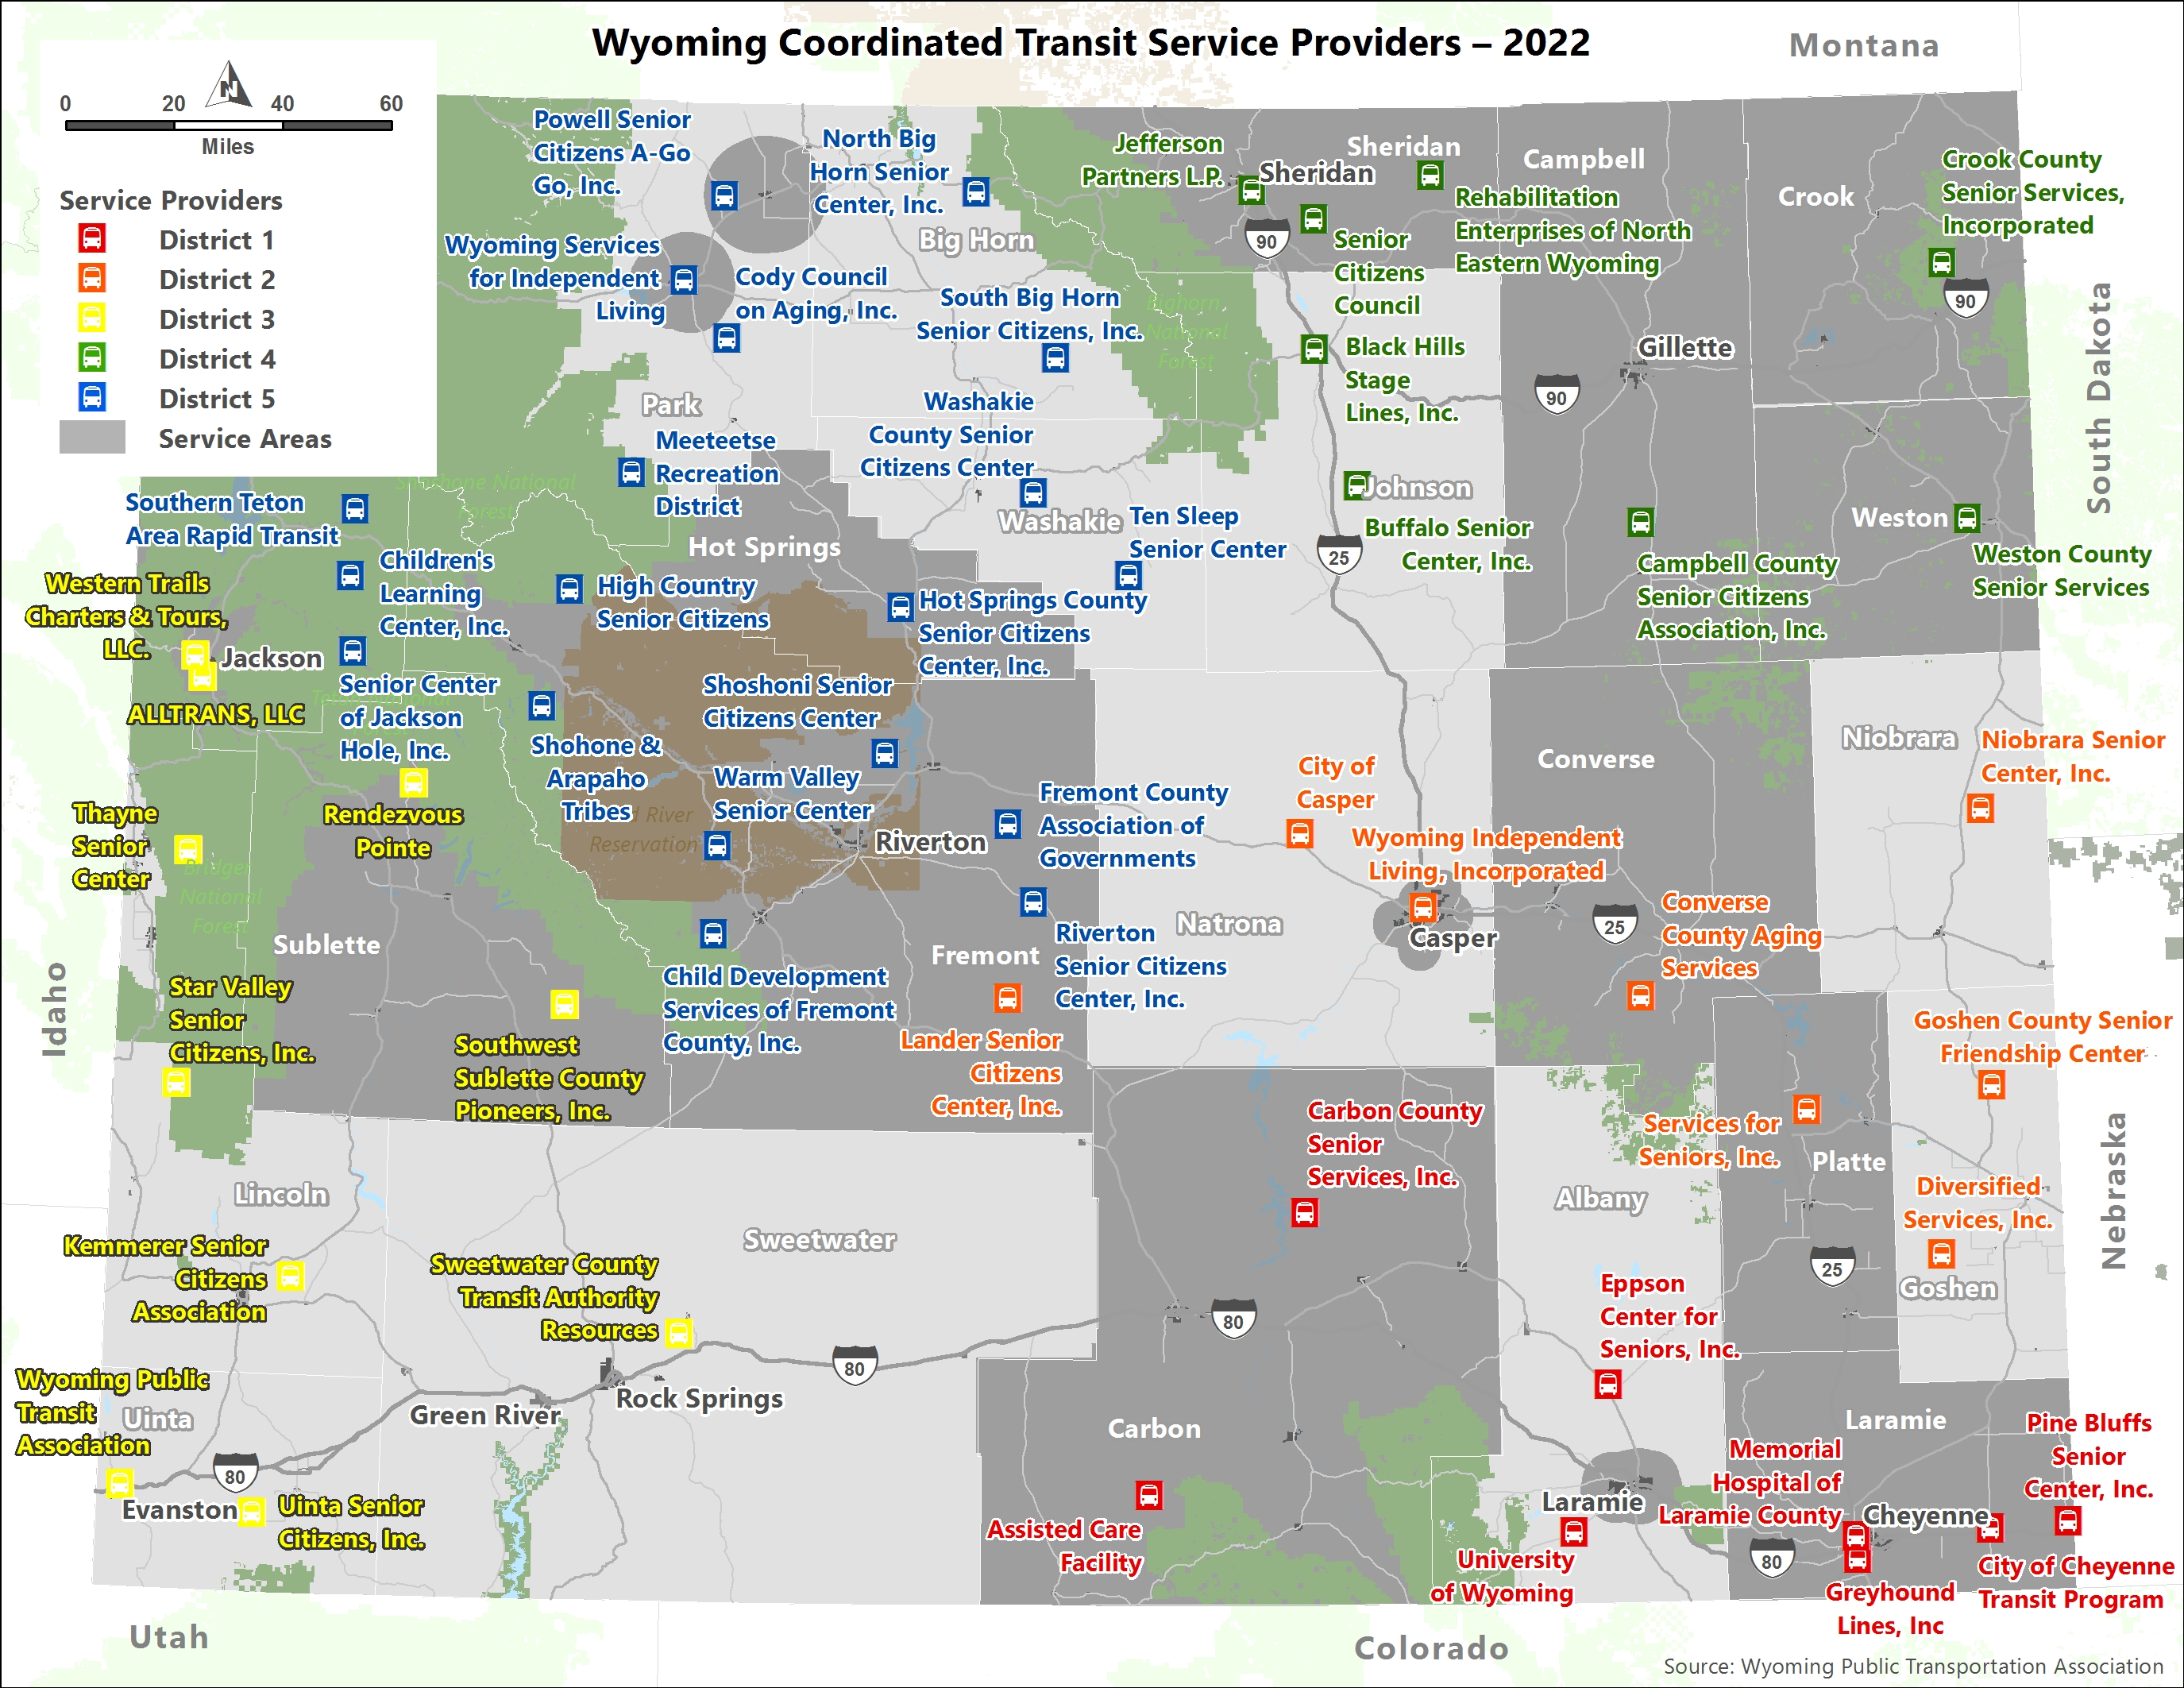 Map of Wyoming showing various service providers.